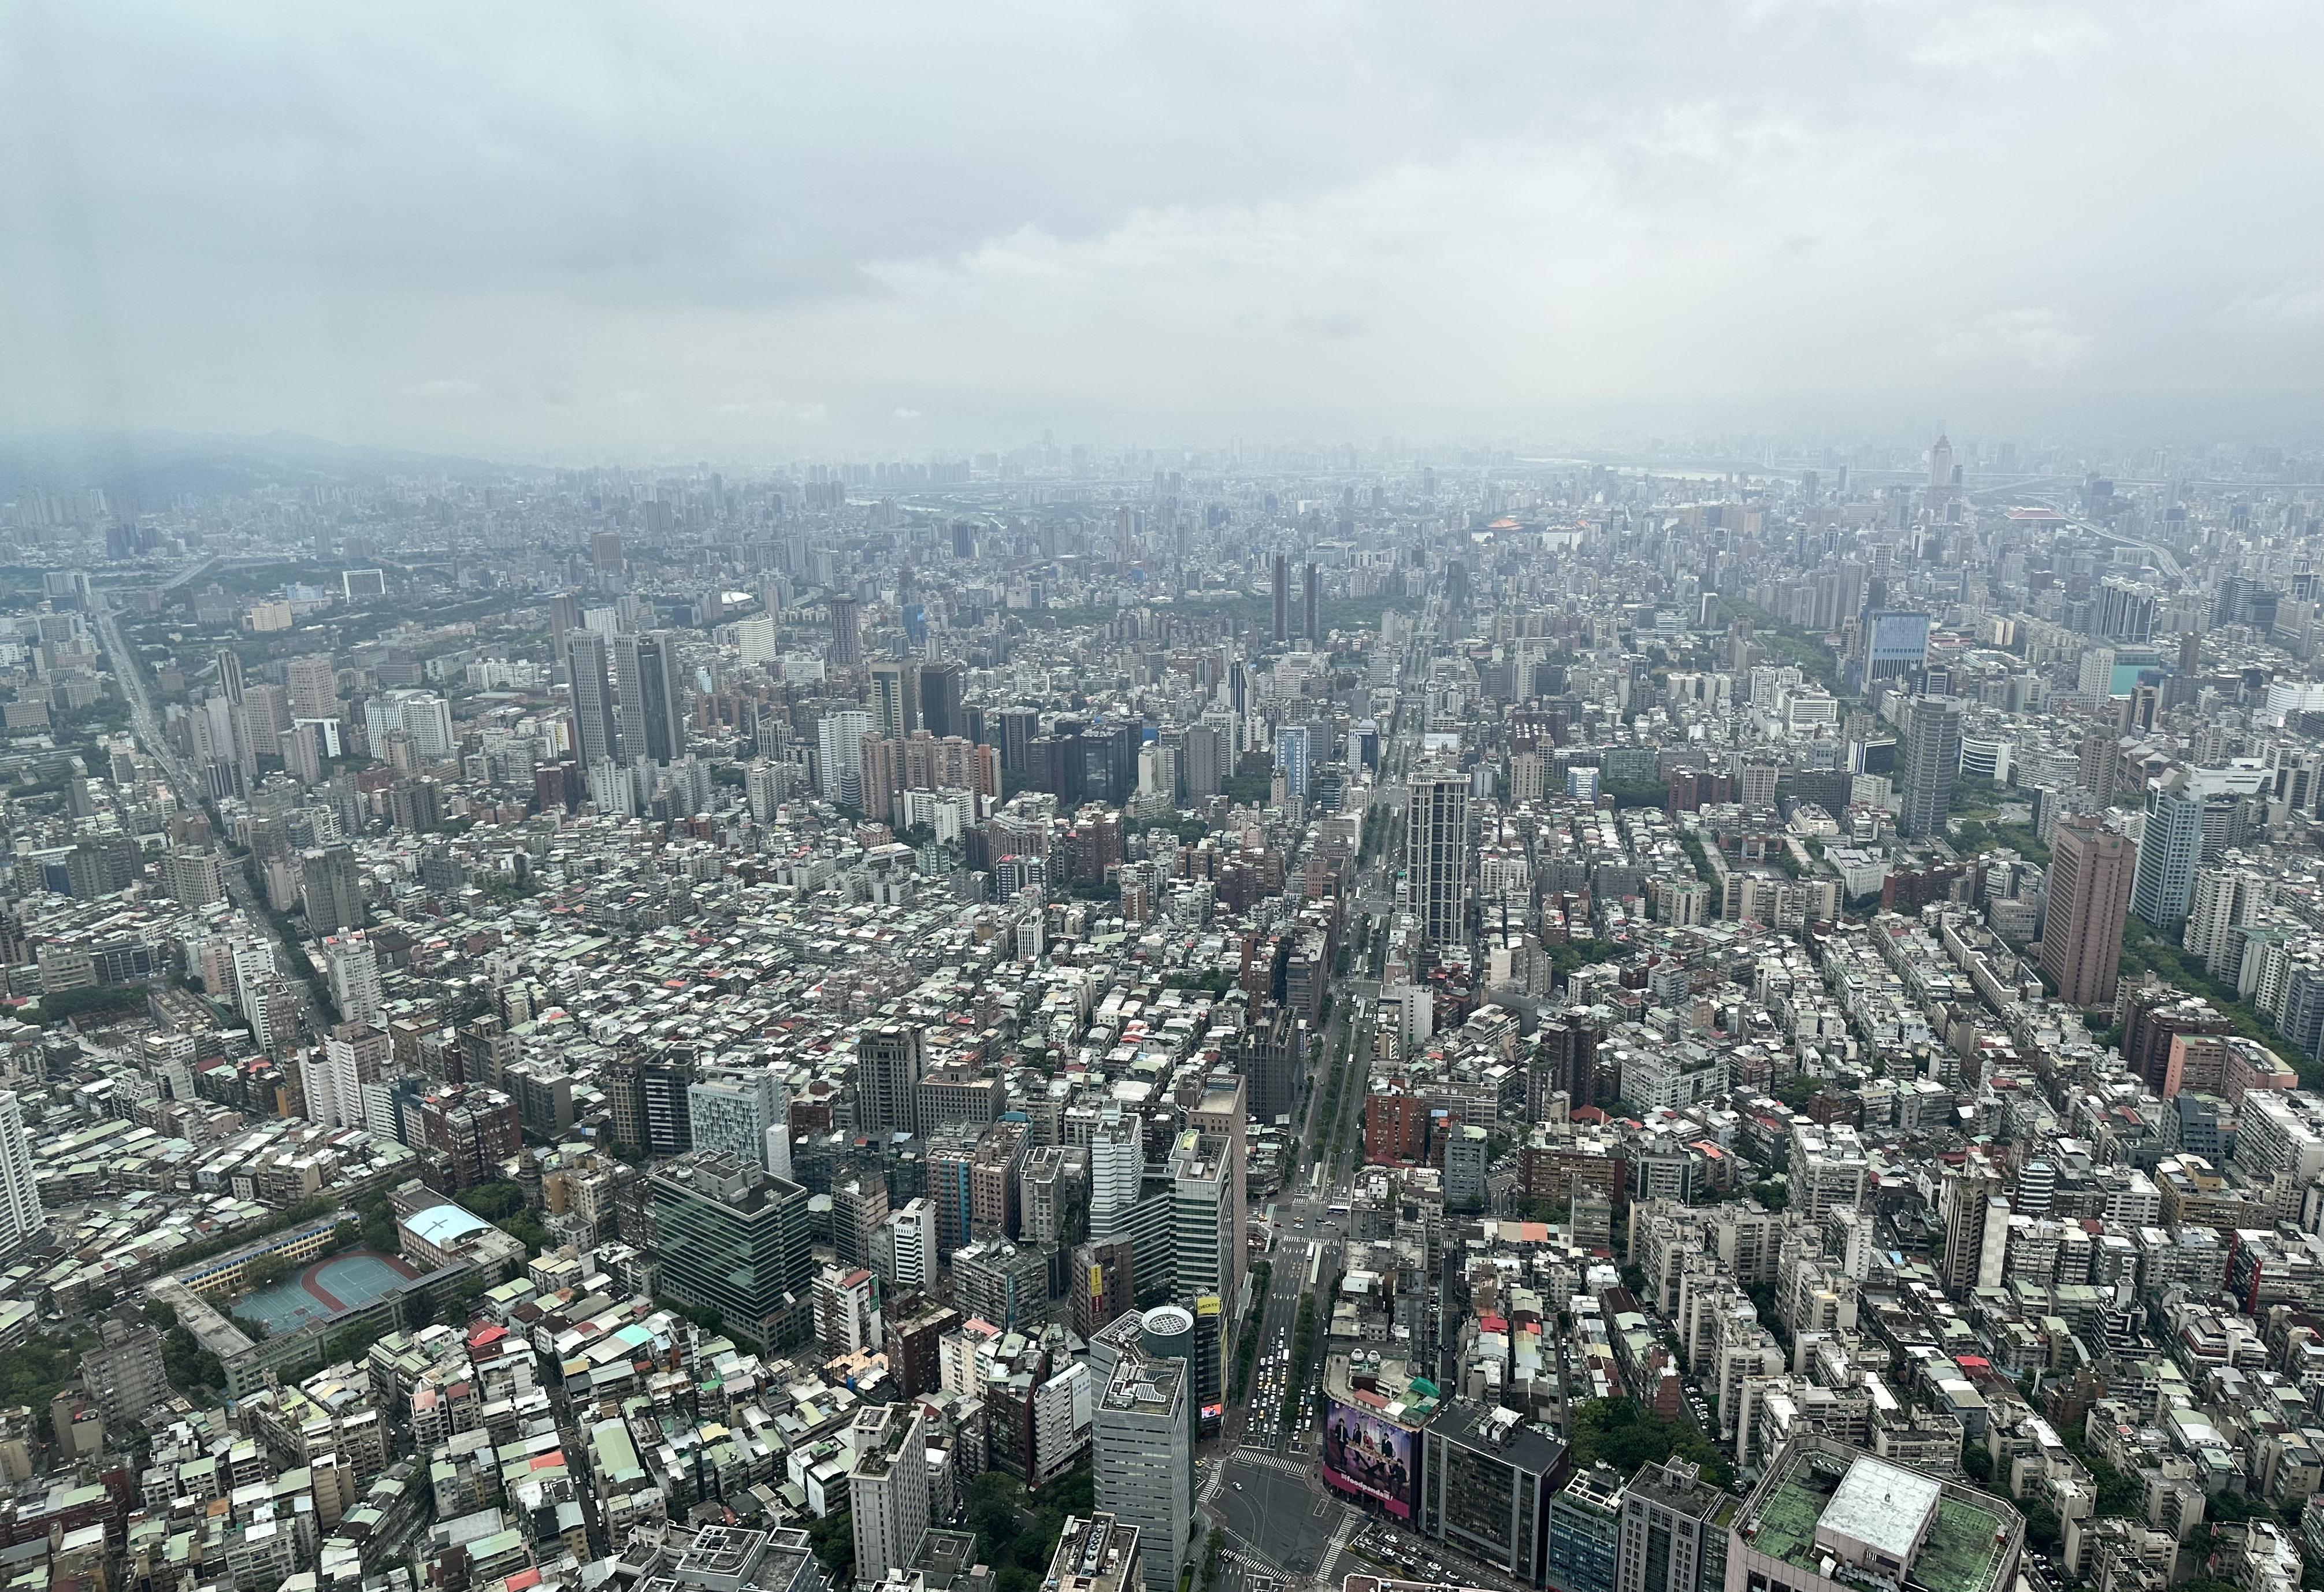 Looking down at Taipei from the top of Taipei 101